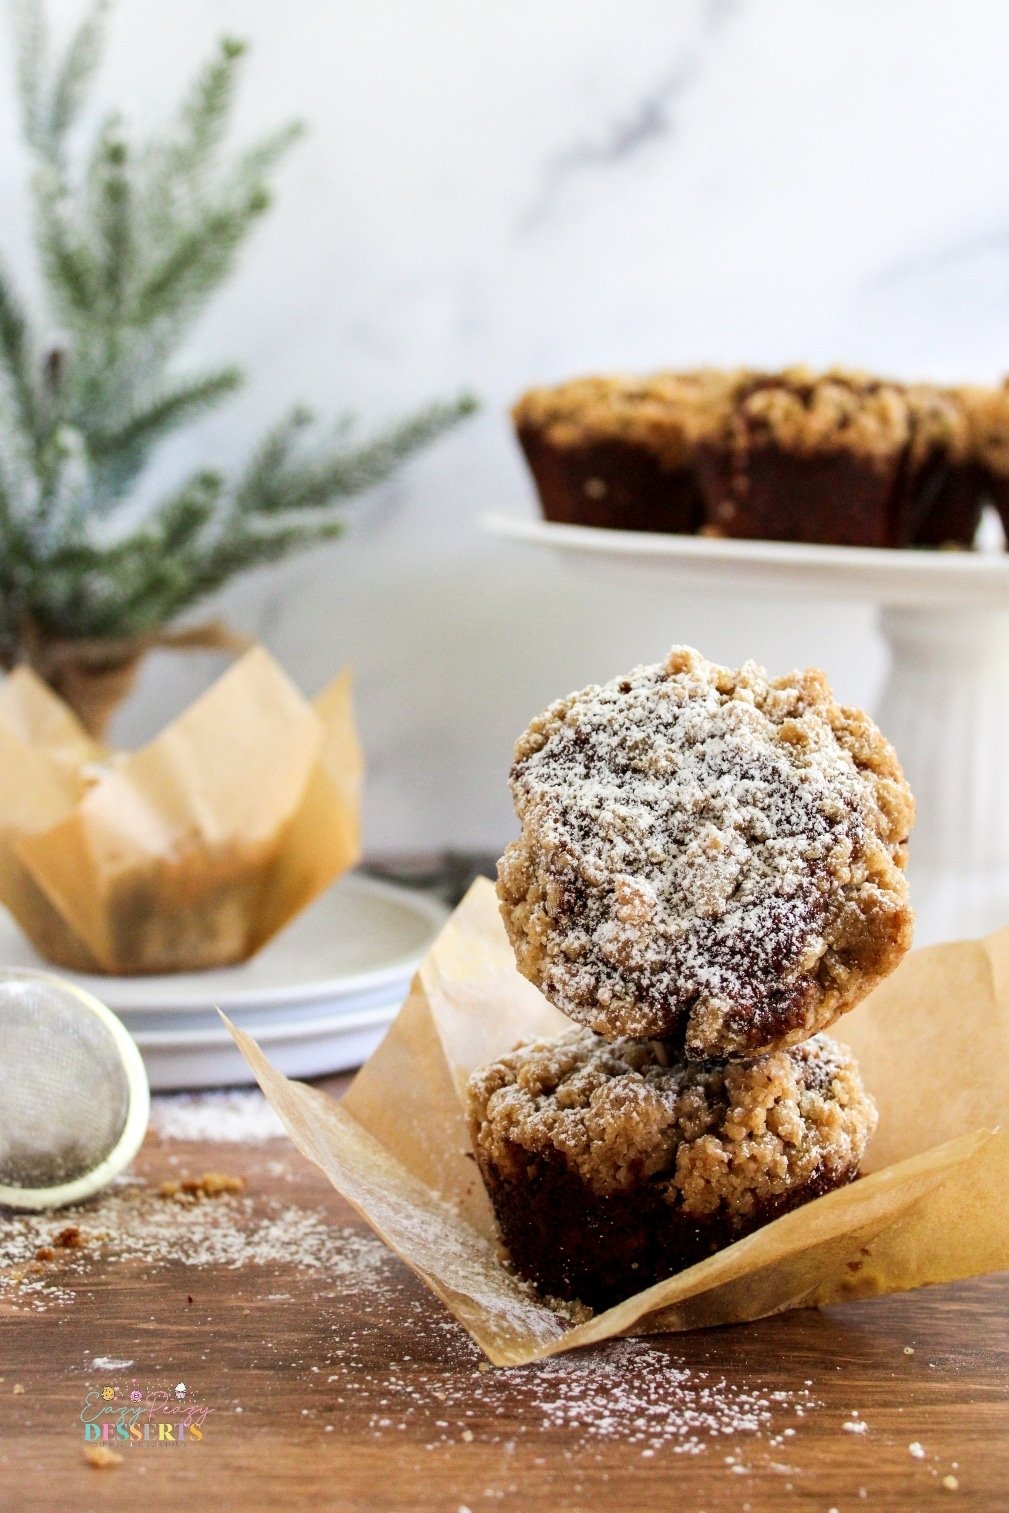 Image of two ginger muffins with streusel top